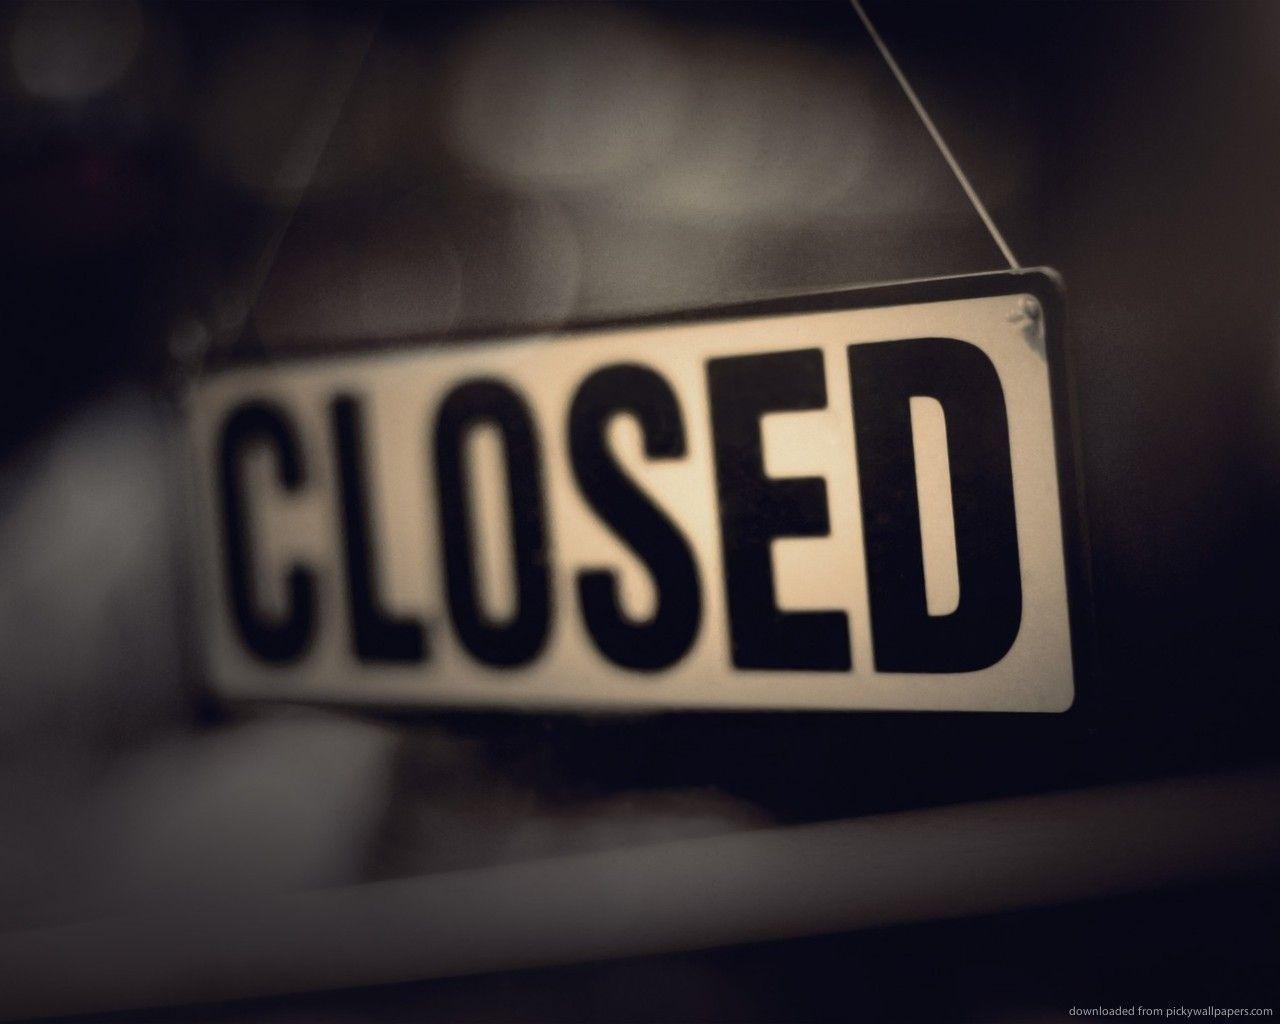 Download 1280x1024 Closed Sign Wallpapers